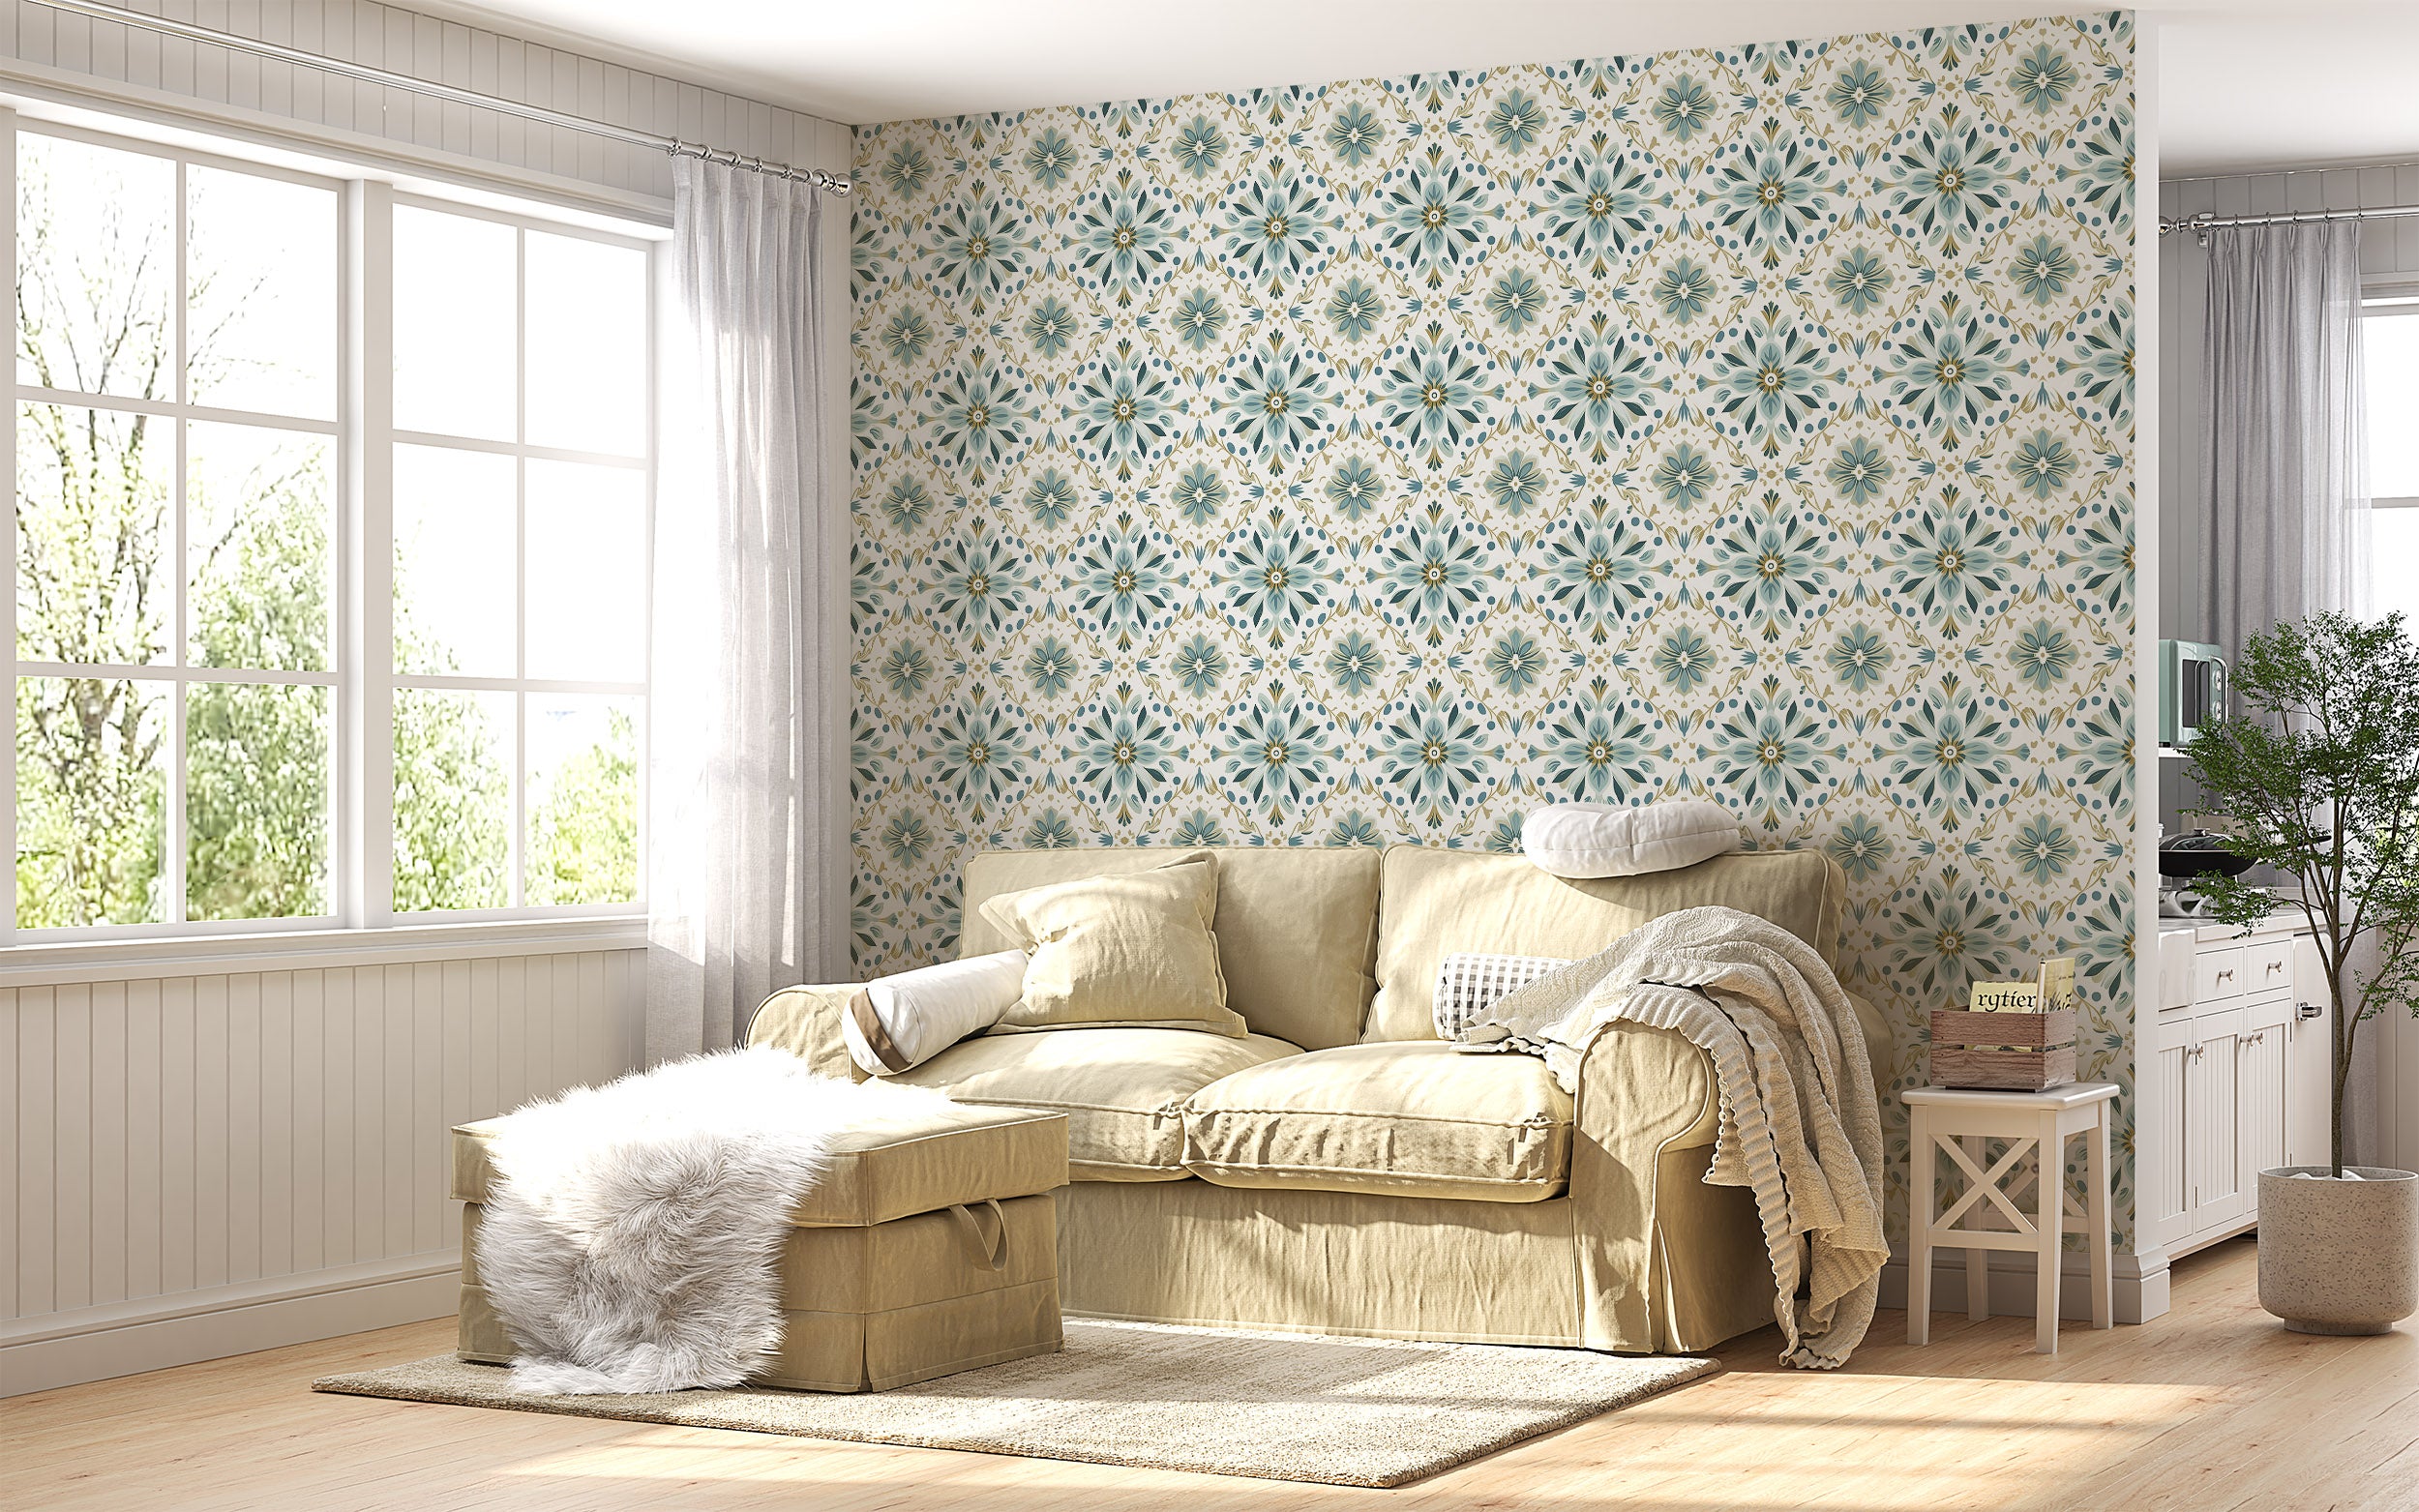 Floral Pattern in Mint and White Wallpaper